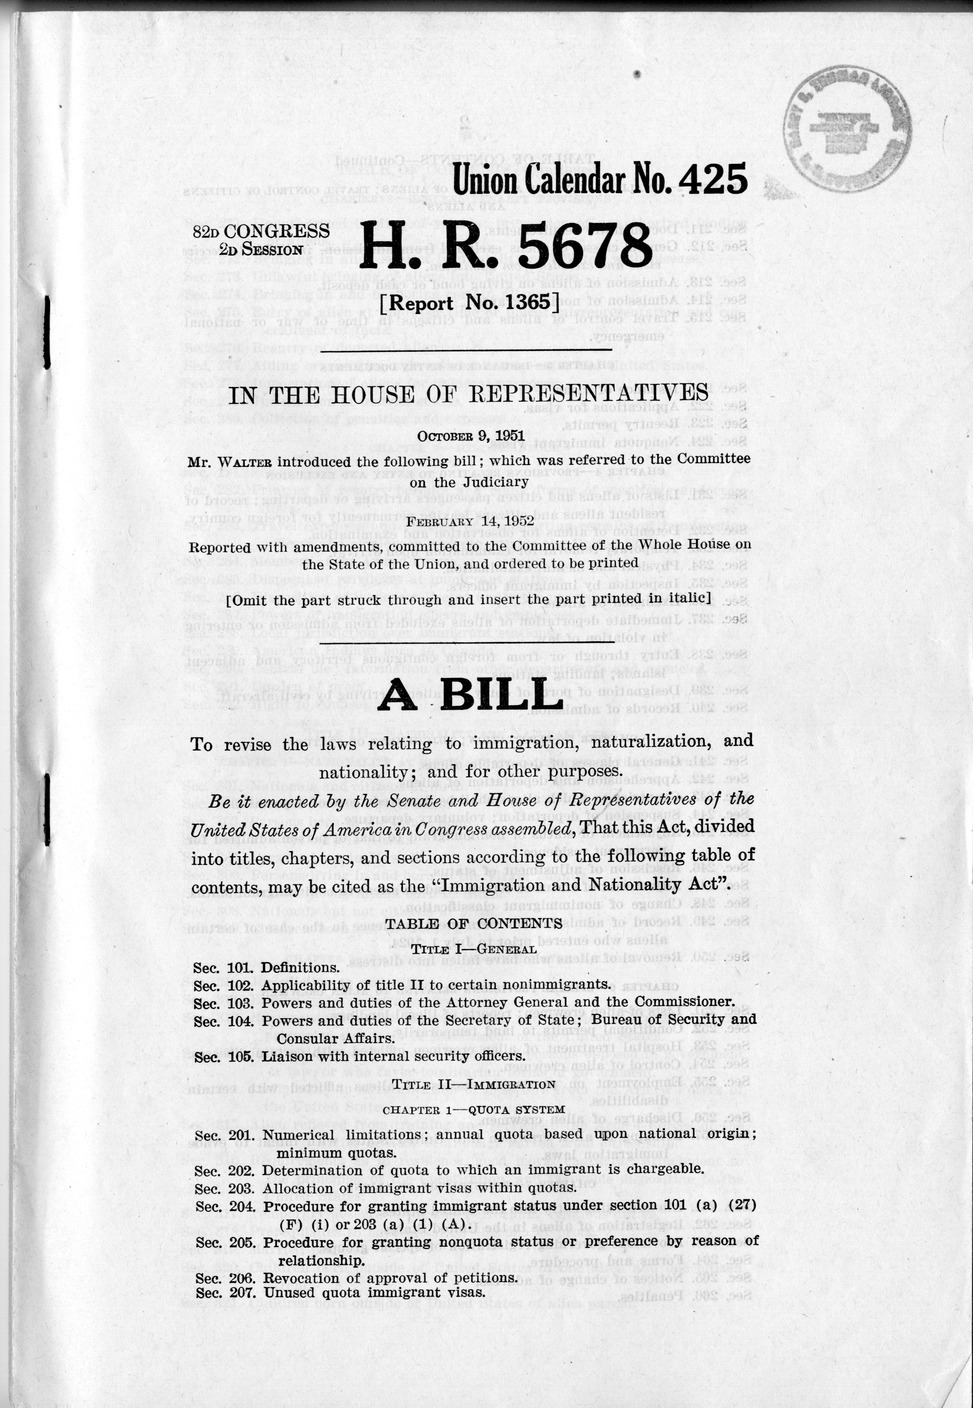 House Resolution 5678, 82nd Congress, Second Session